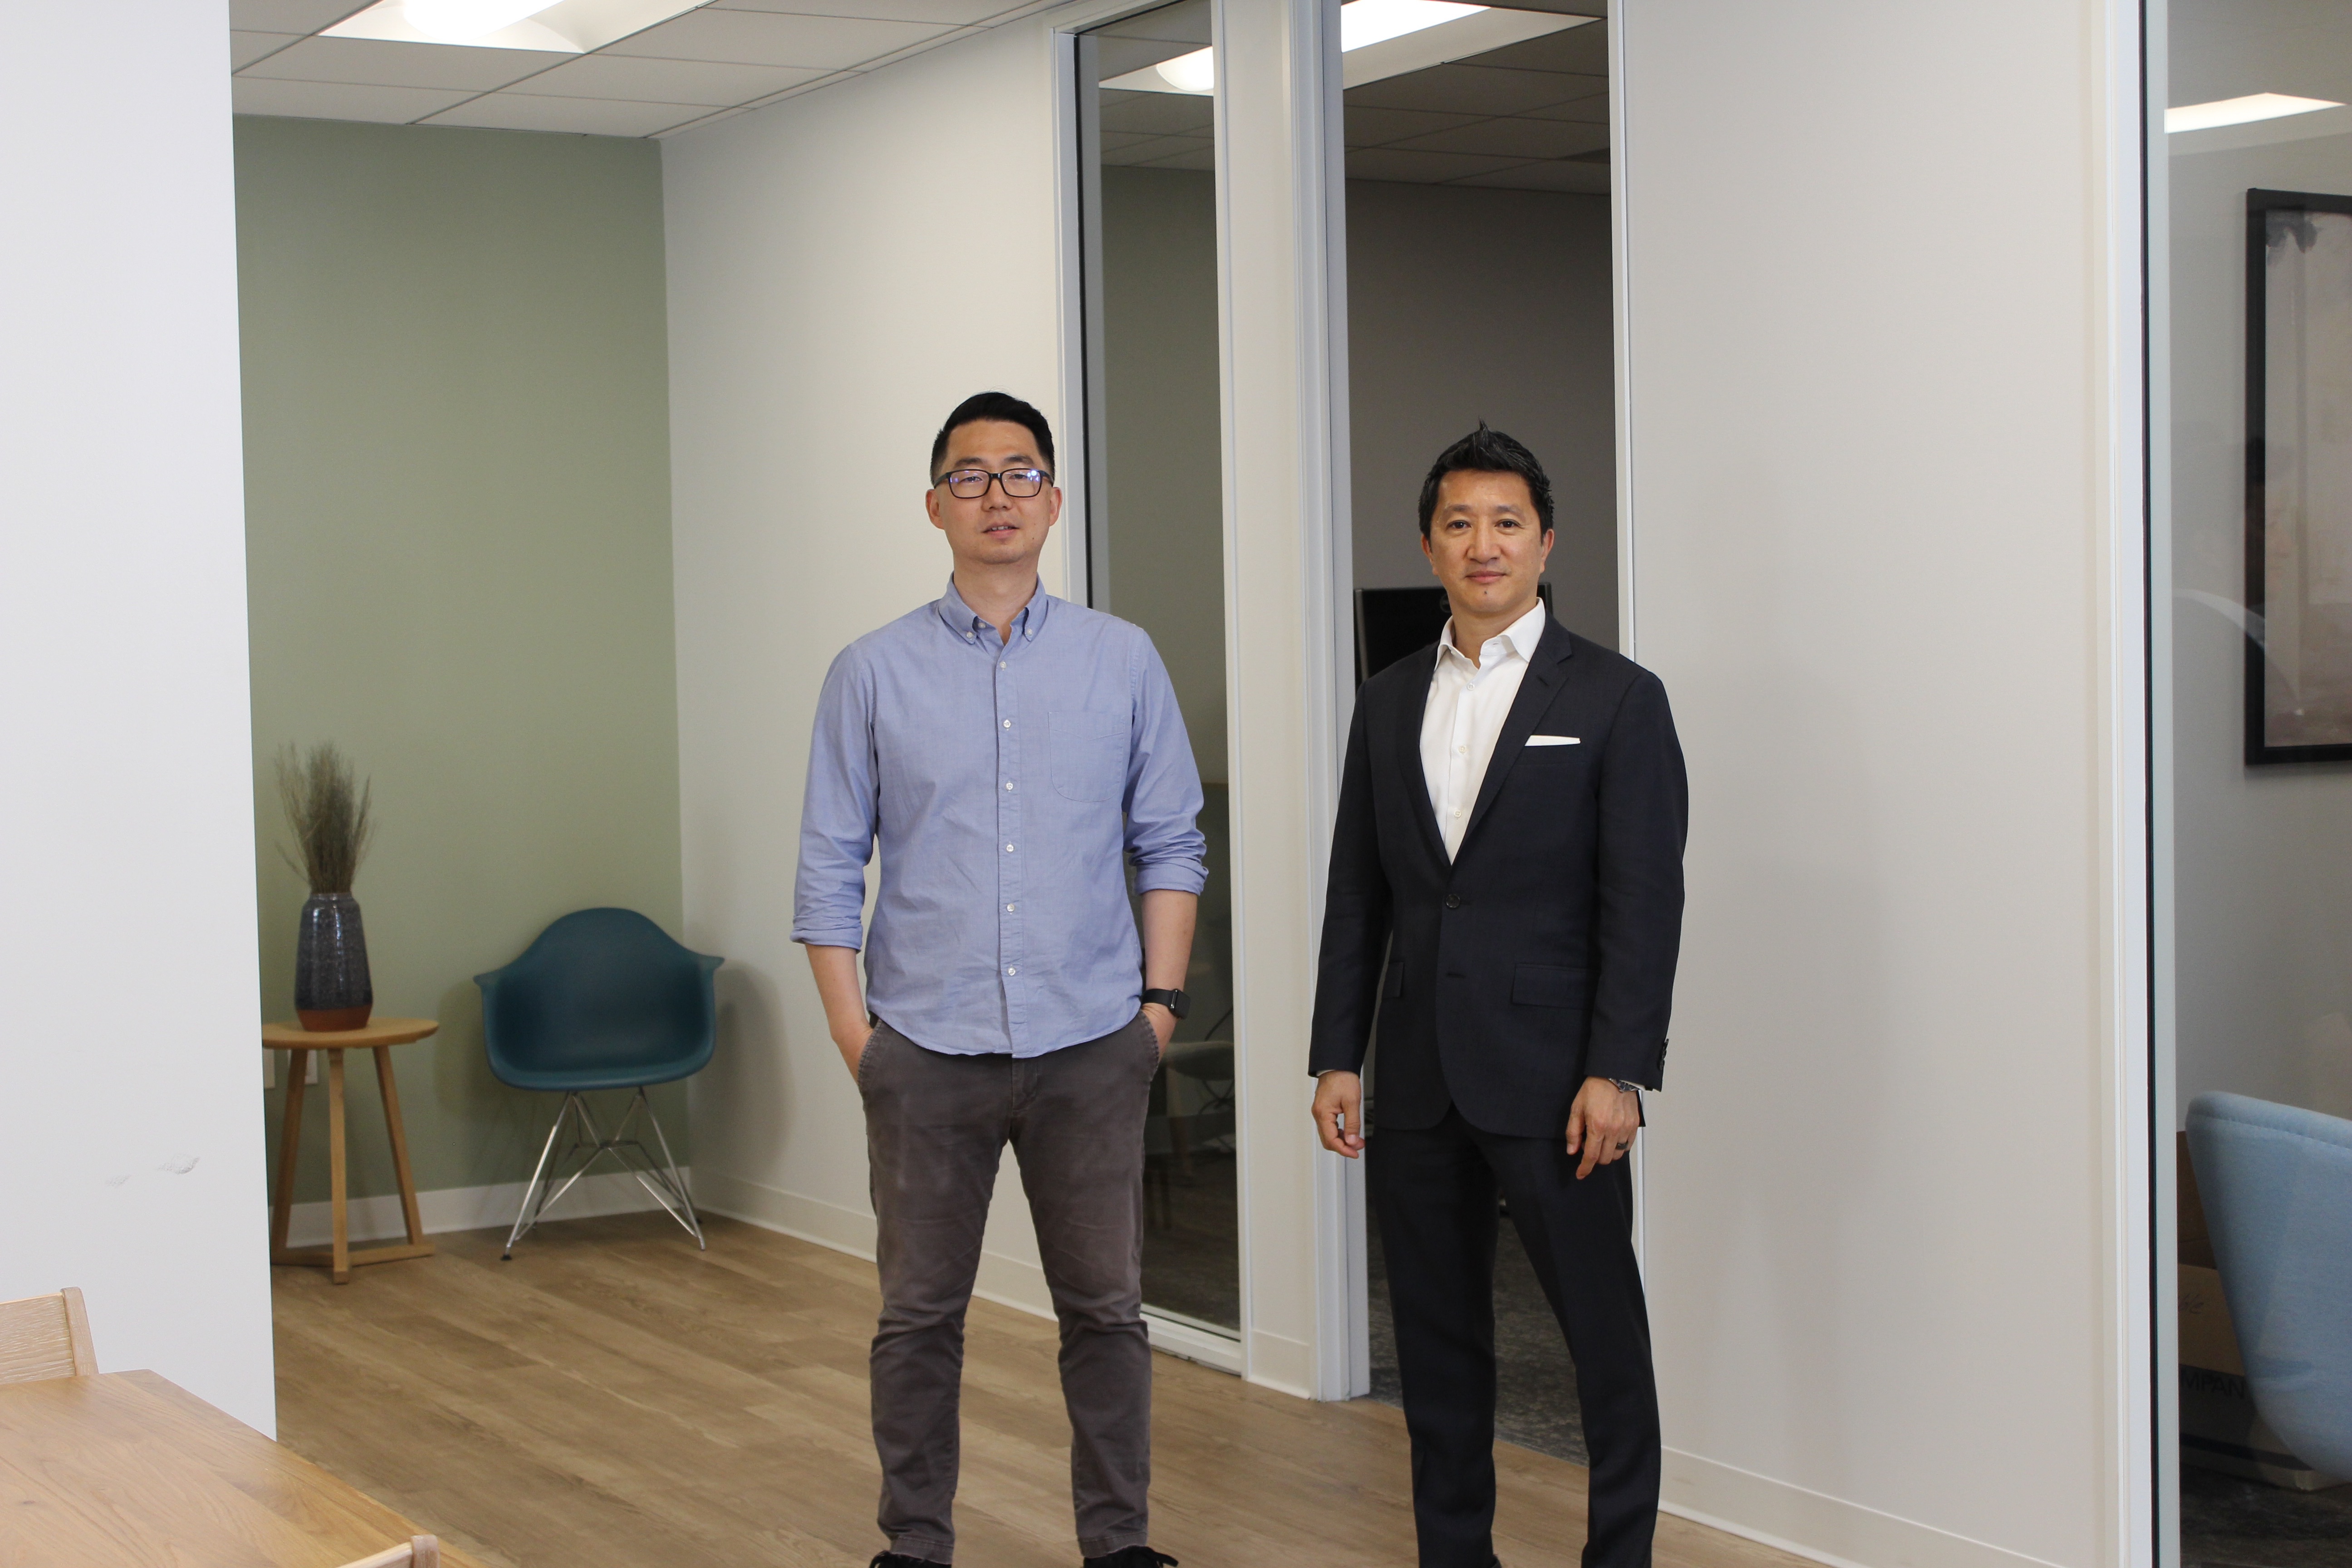 Paul Kim, Co-founder and CEO & Jay Tabu, Co-founder